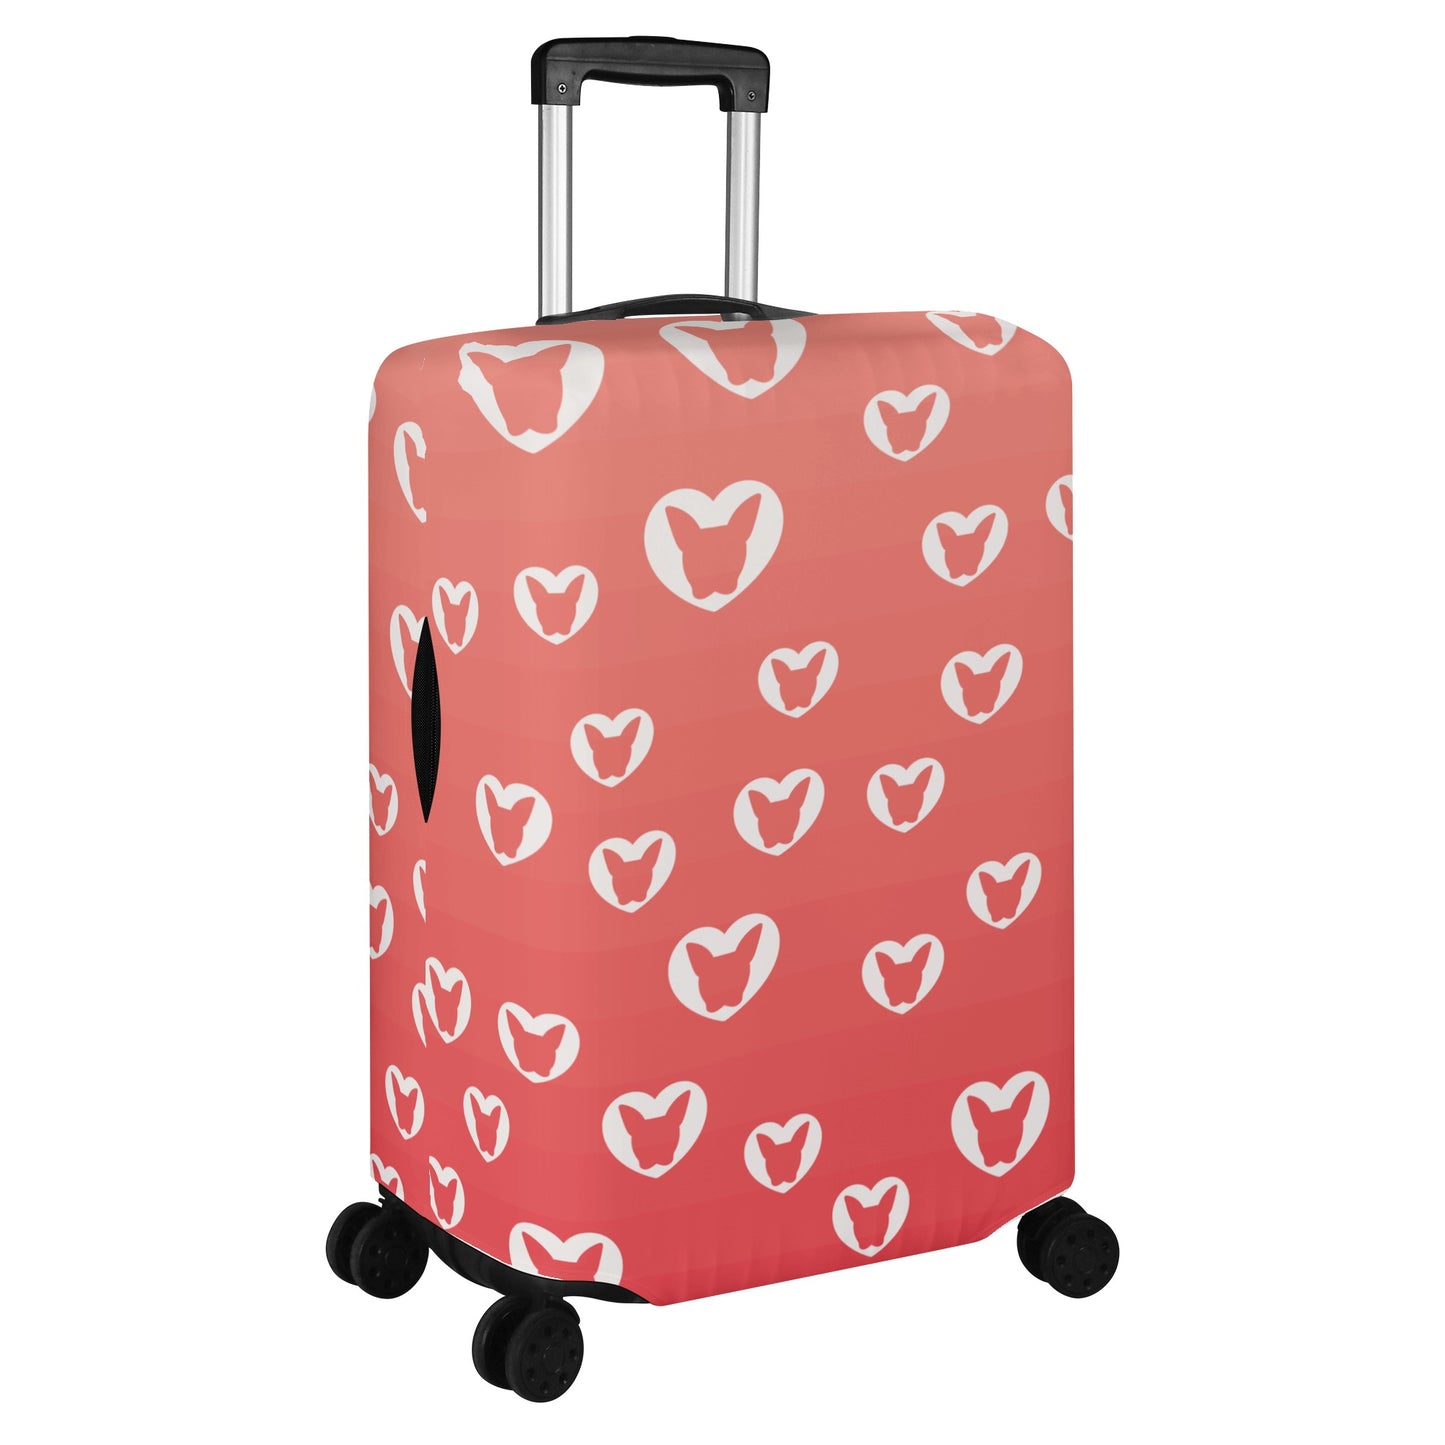 Chloe - Luggage Cover for Boston Terrier lovers